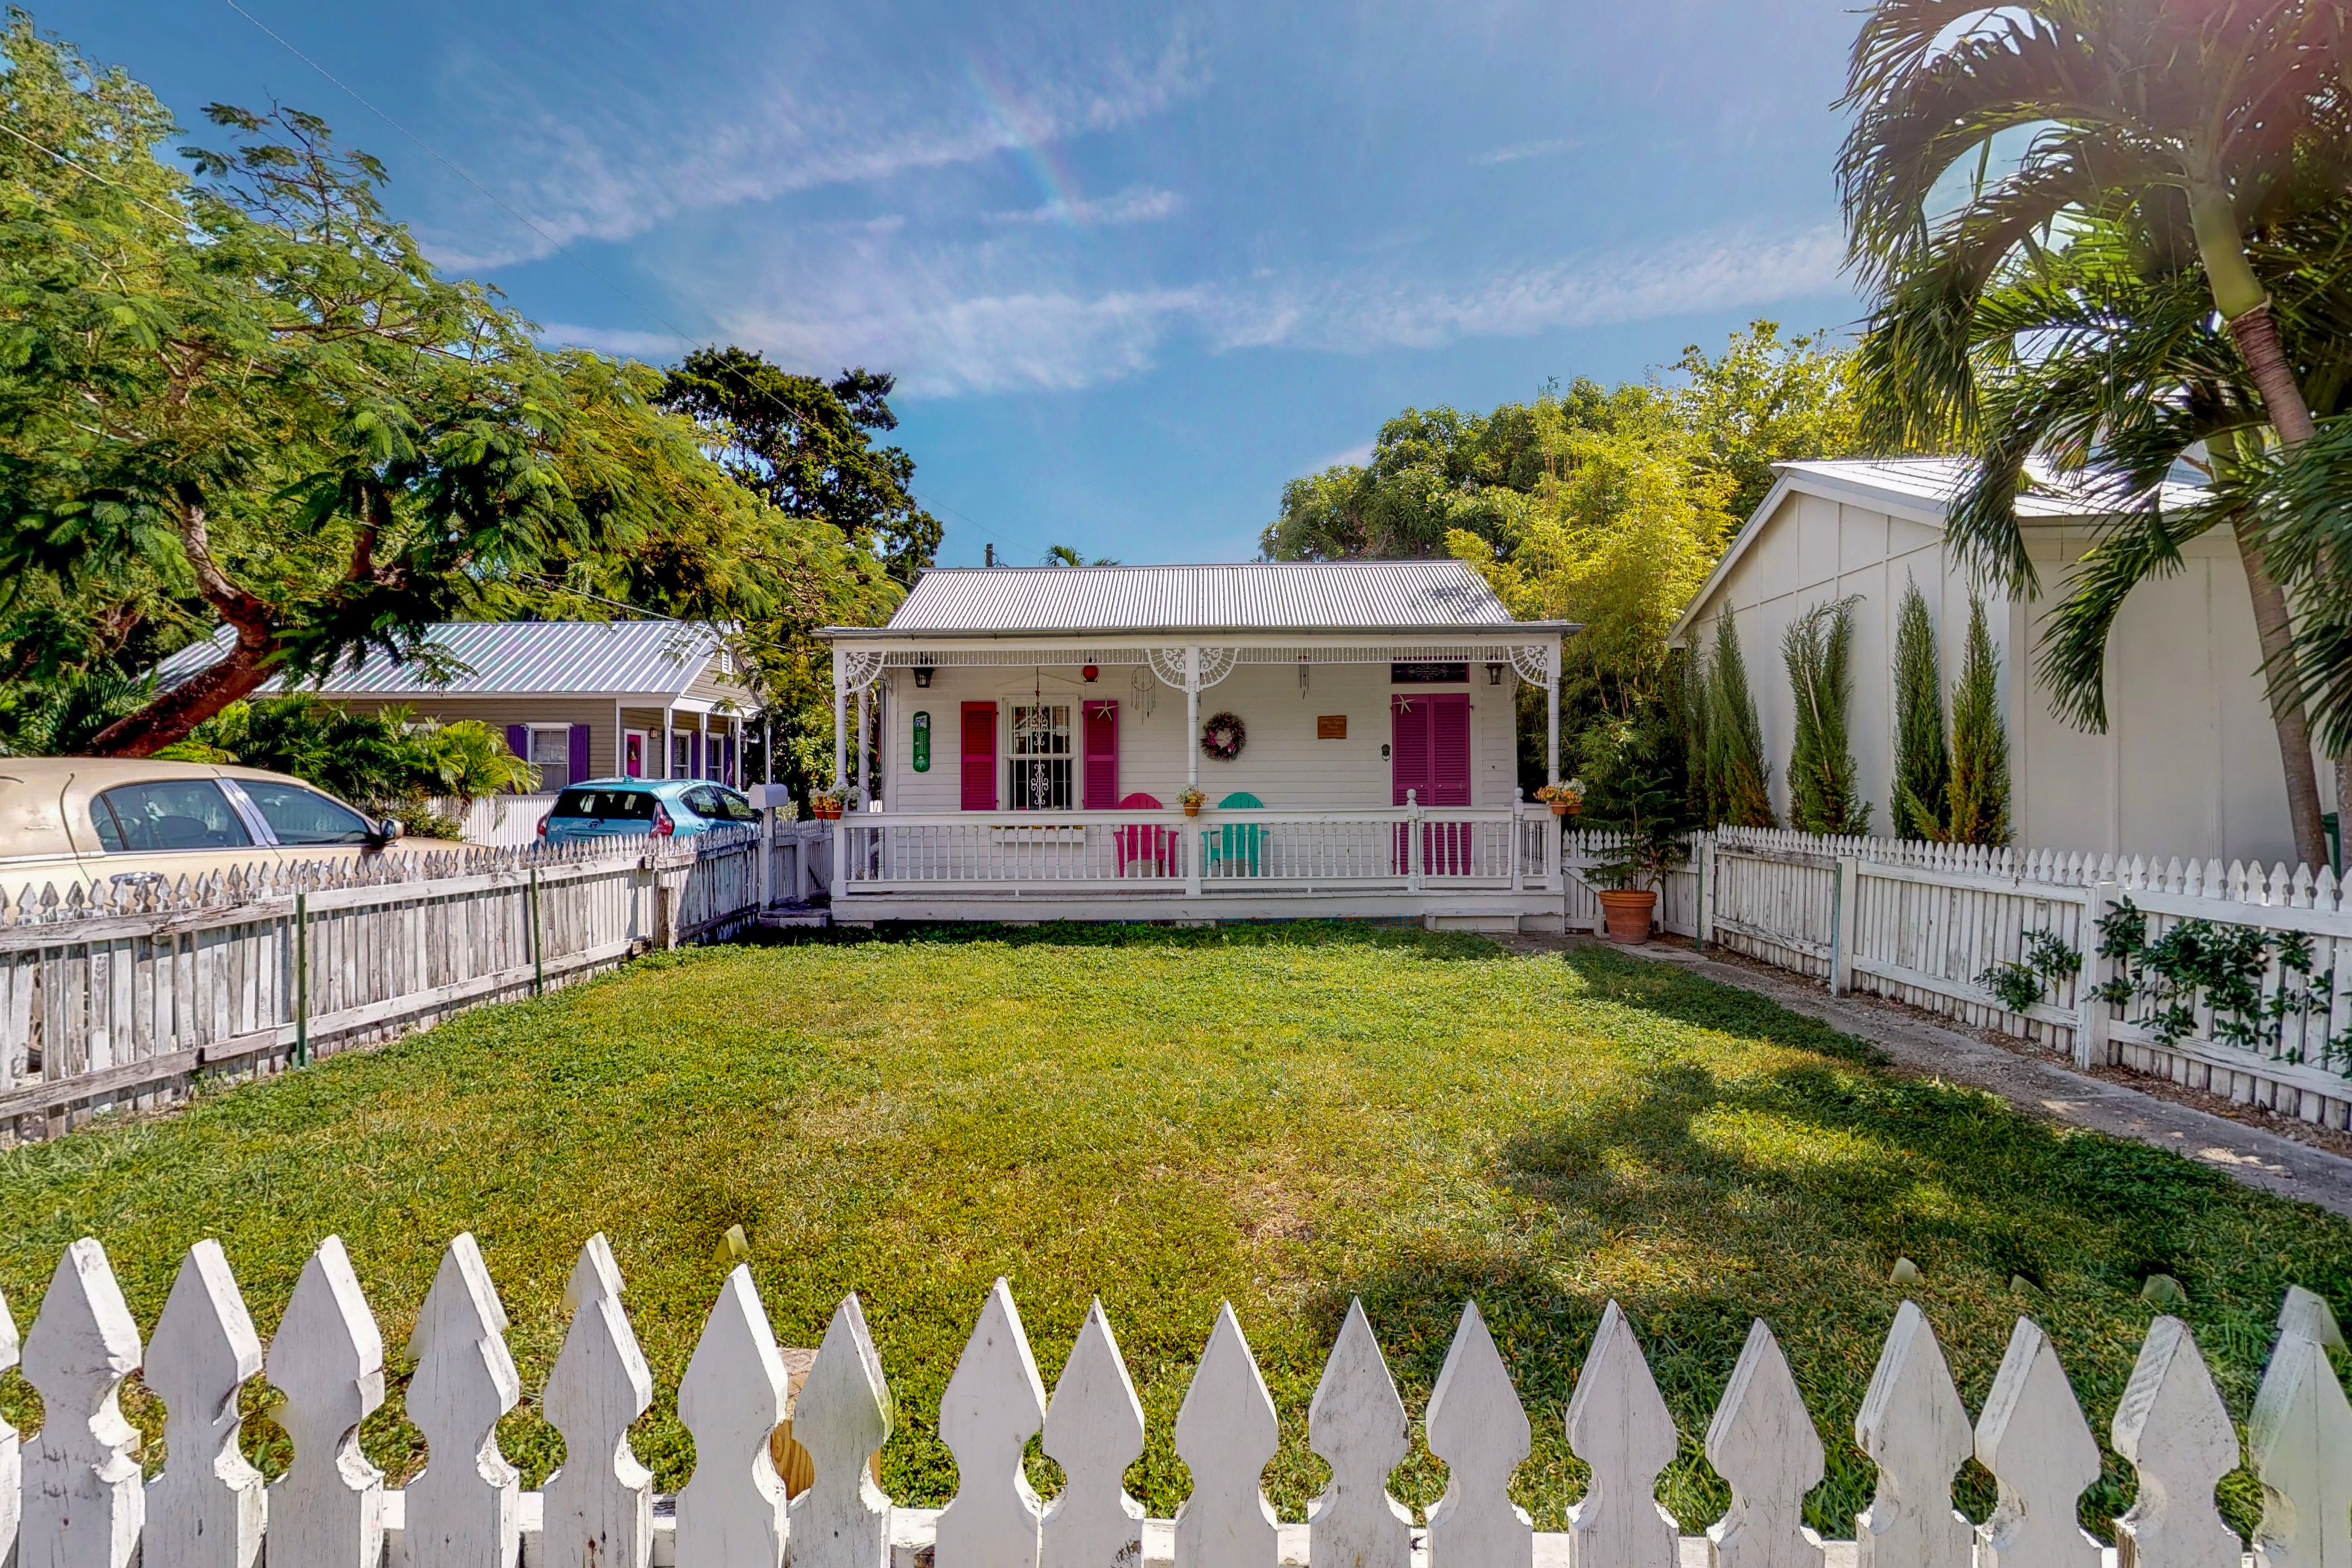 Gingerbread House / Cottage rental in Beach House Rentals Key West in Key West Florida - #2